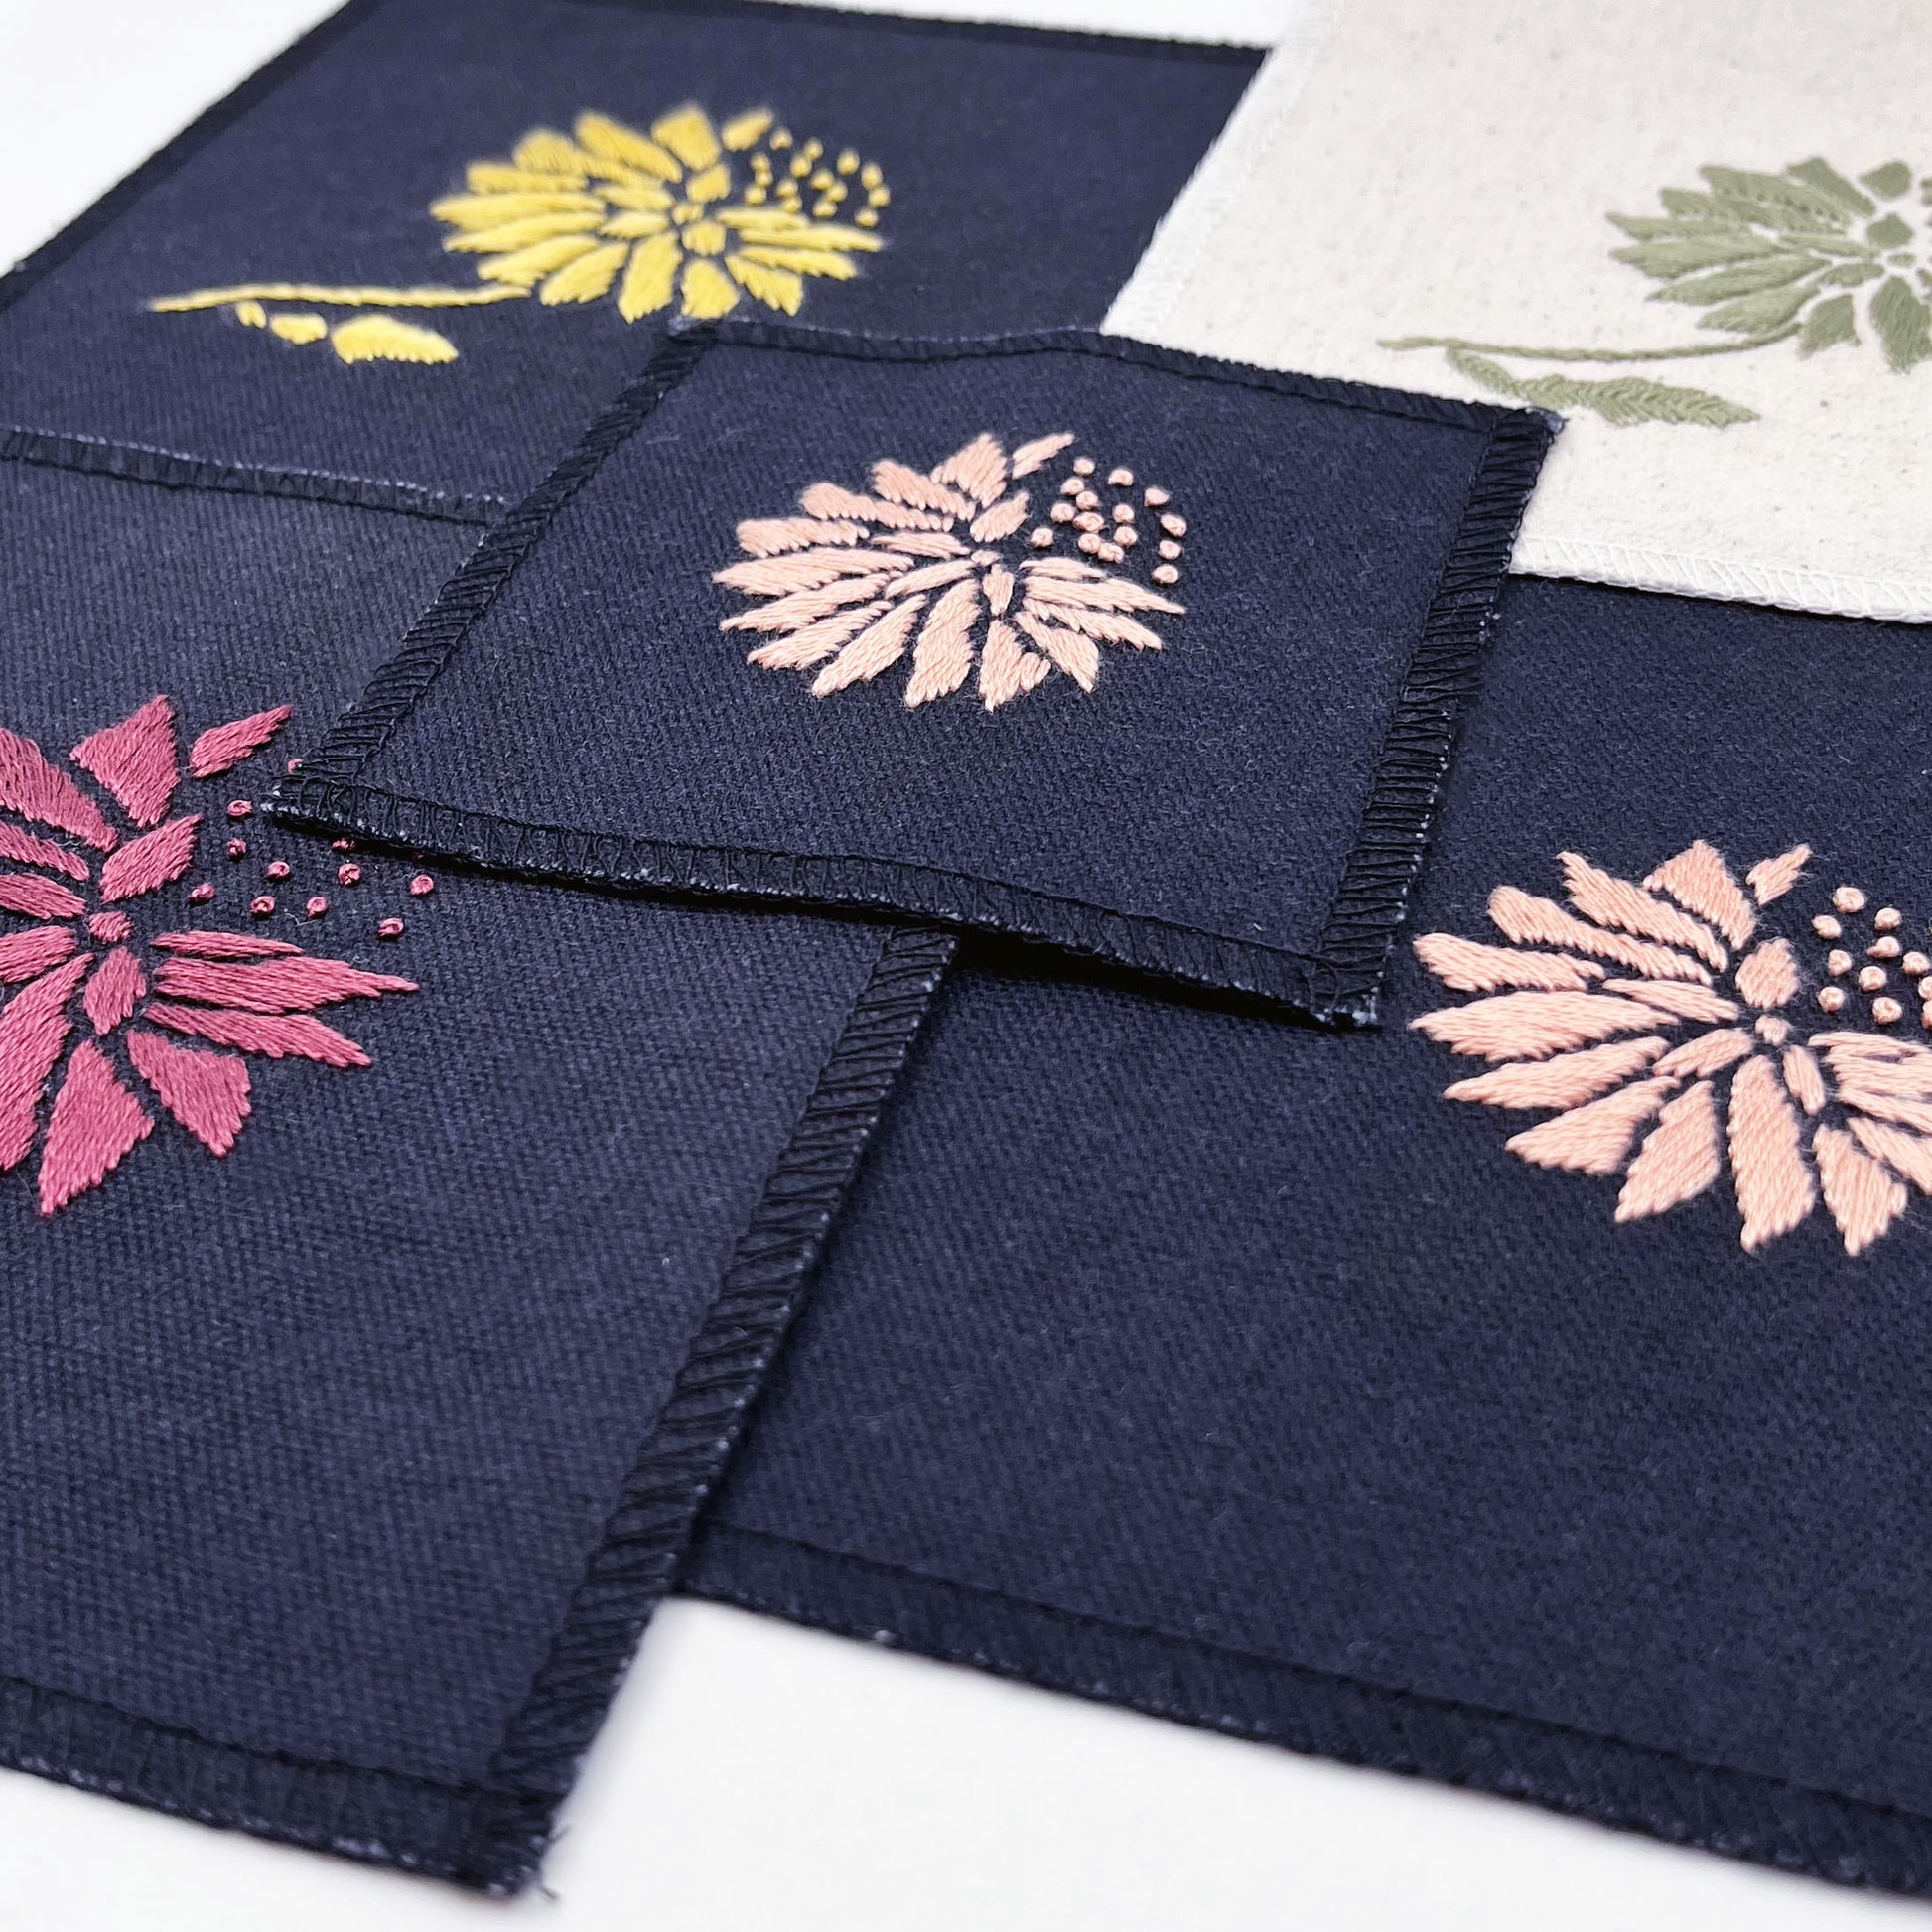 a group of square patches in natural colored and black fabric, hand embroidered with an abstract dandelion made mostly of petals, with a quarter of them replaced with french knots, in a different colors on each patch- plum, peach, sage, yellow gold